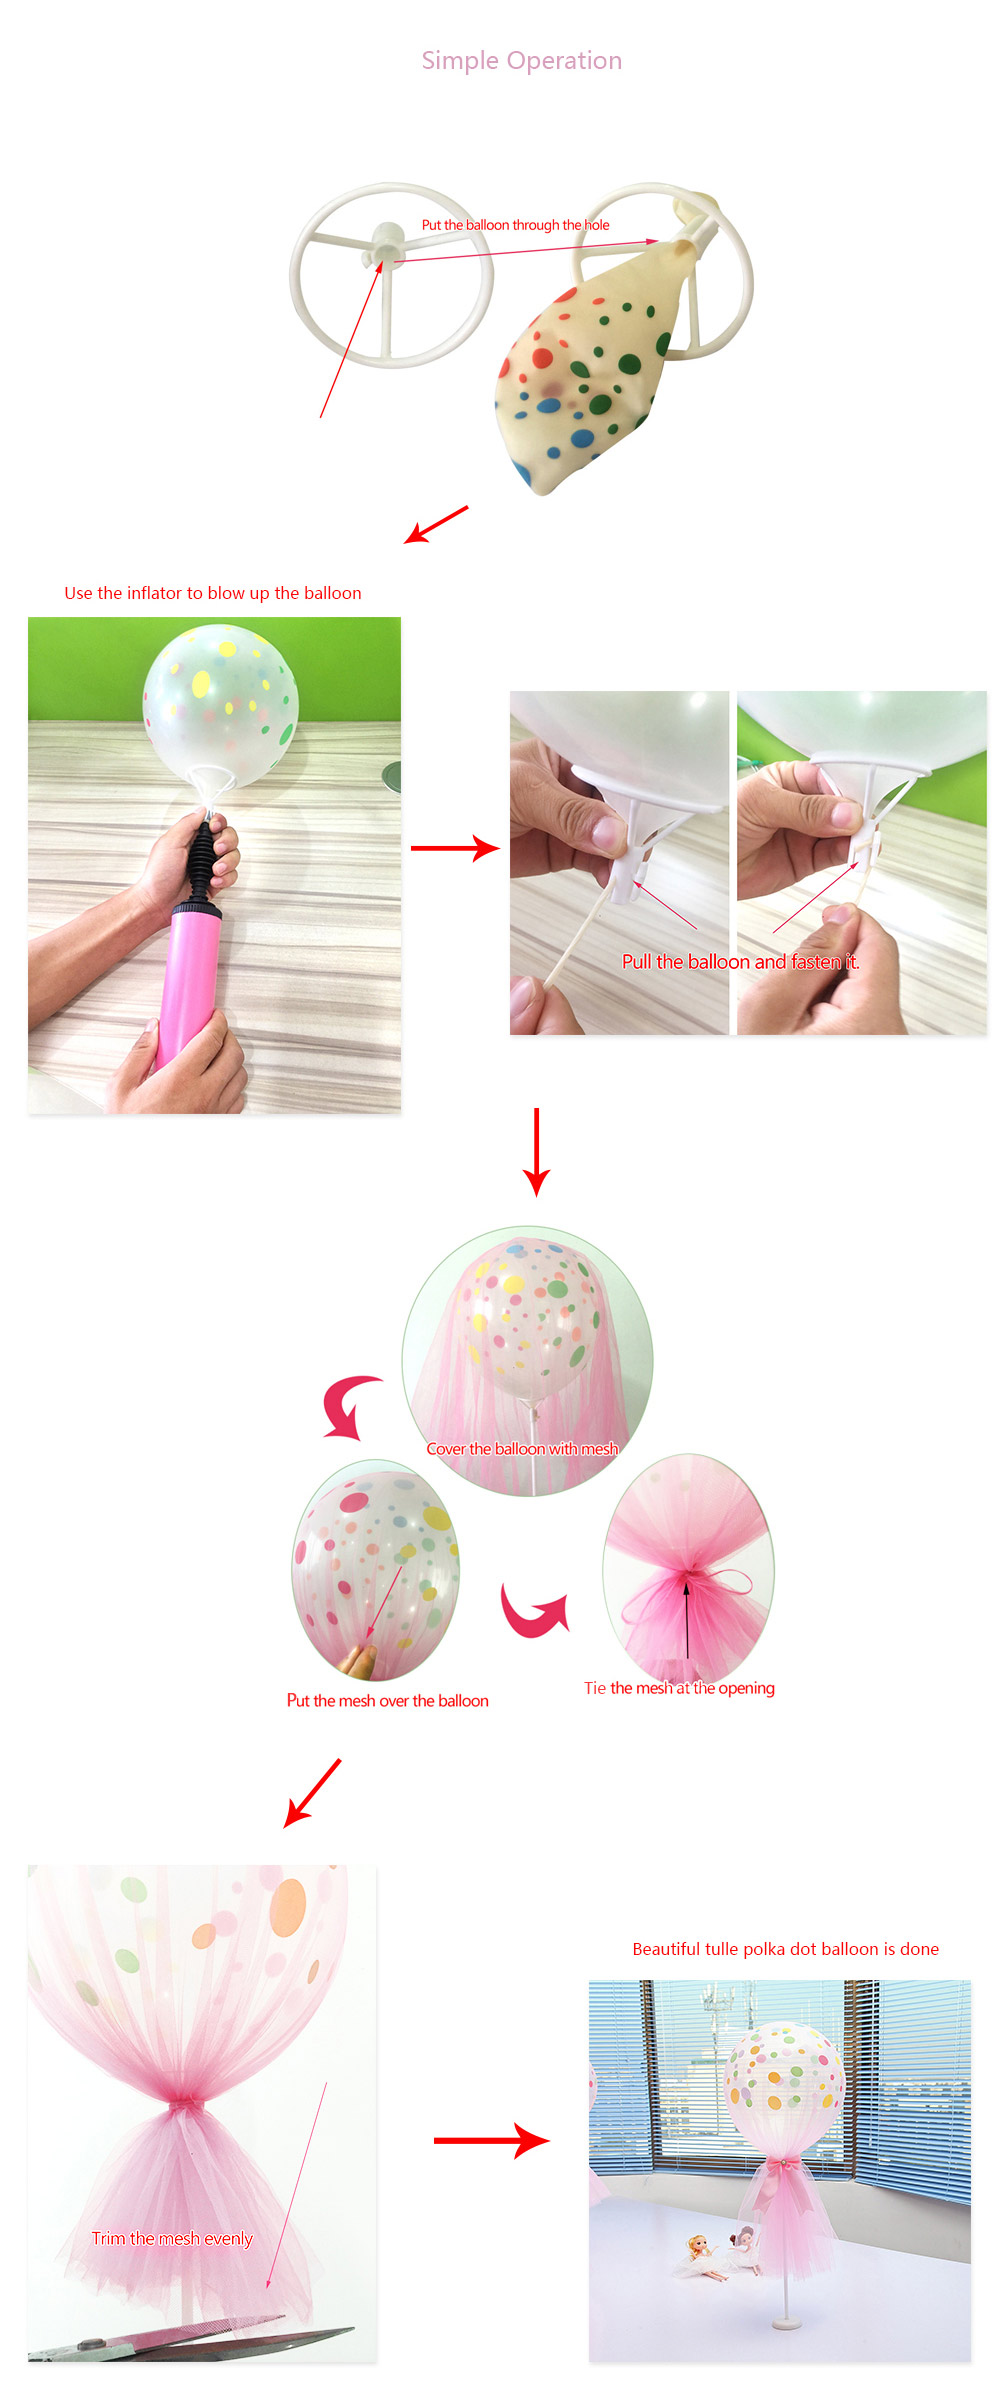 12 inch Tulle Polka Dot Balloon Kit for Birthday Wedding Party Valentine's Day Decoration